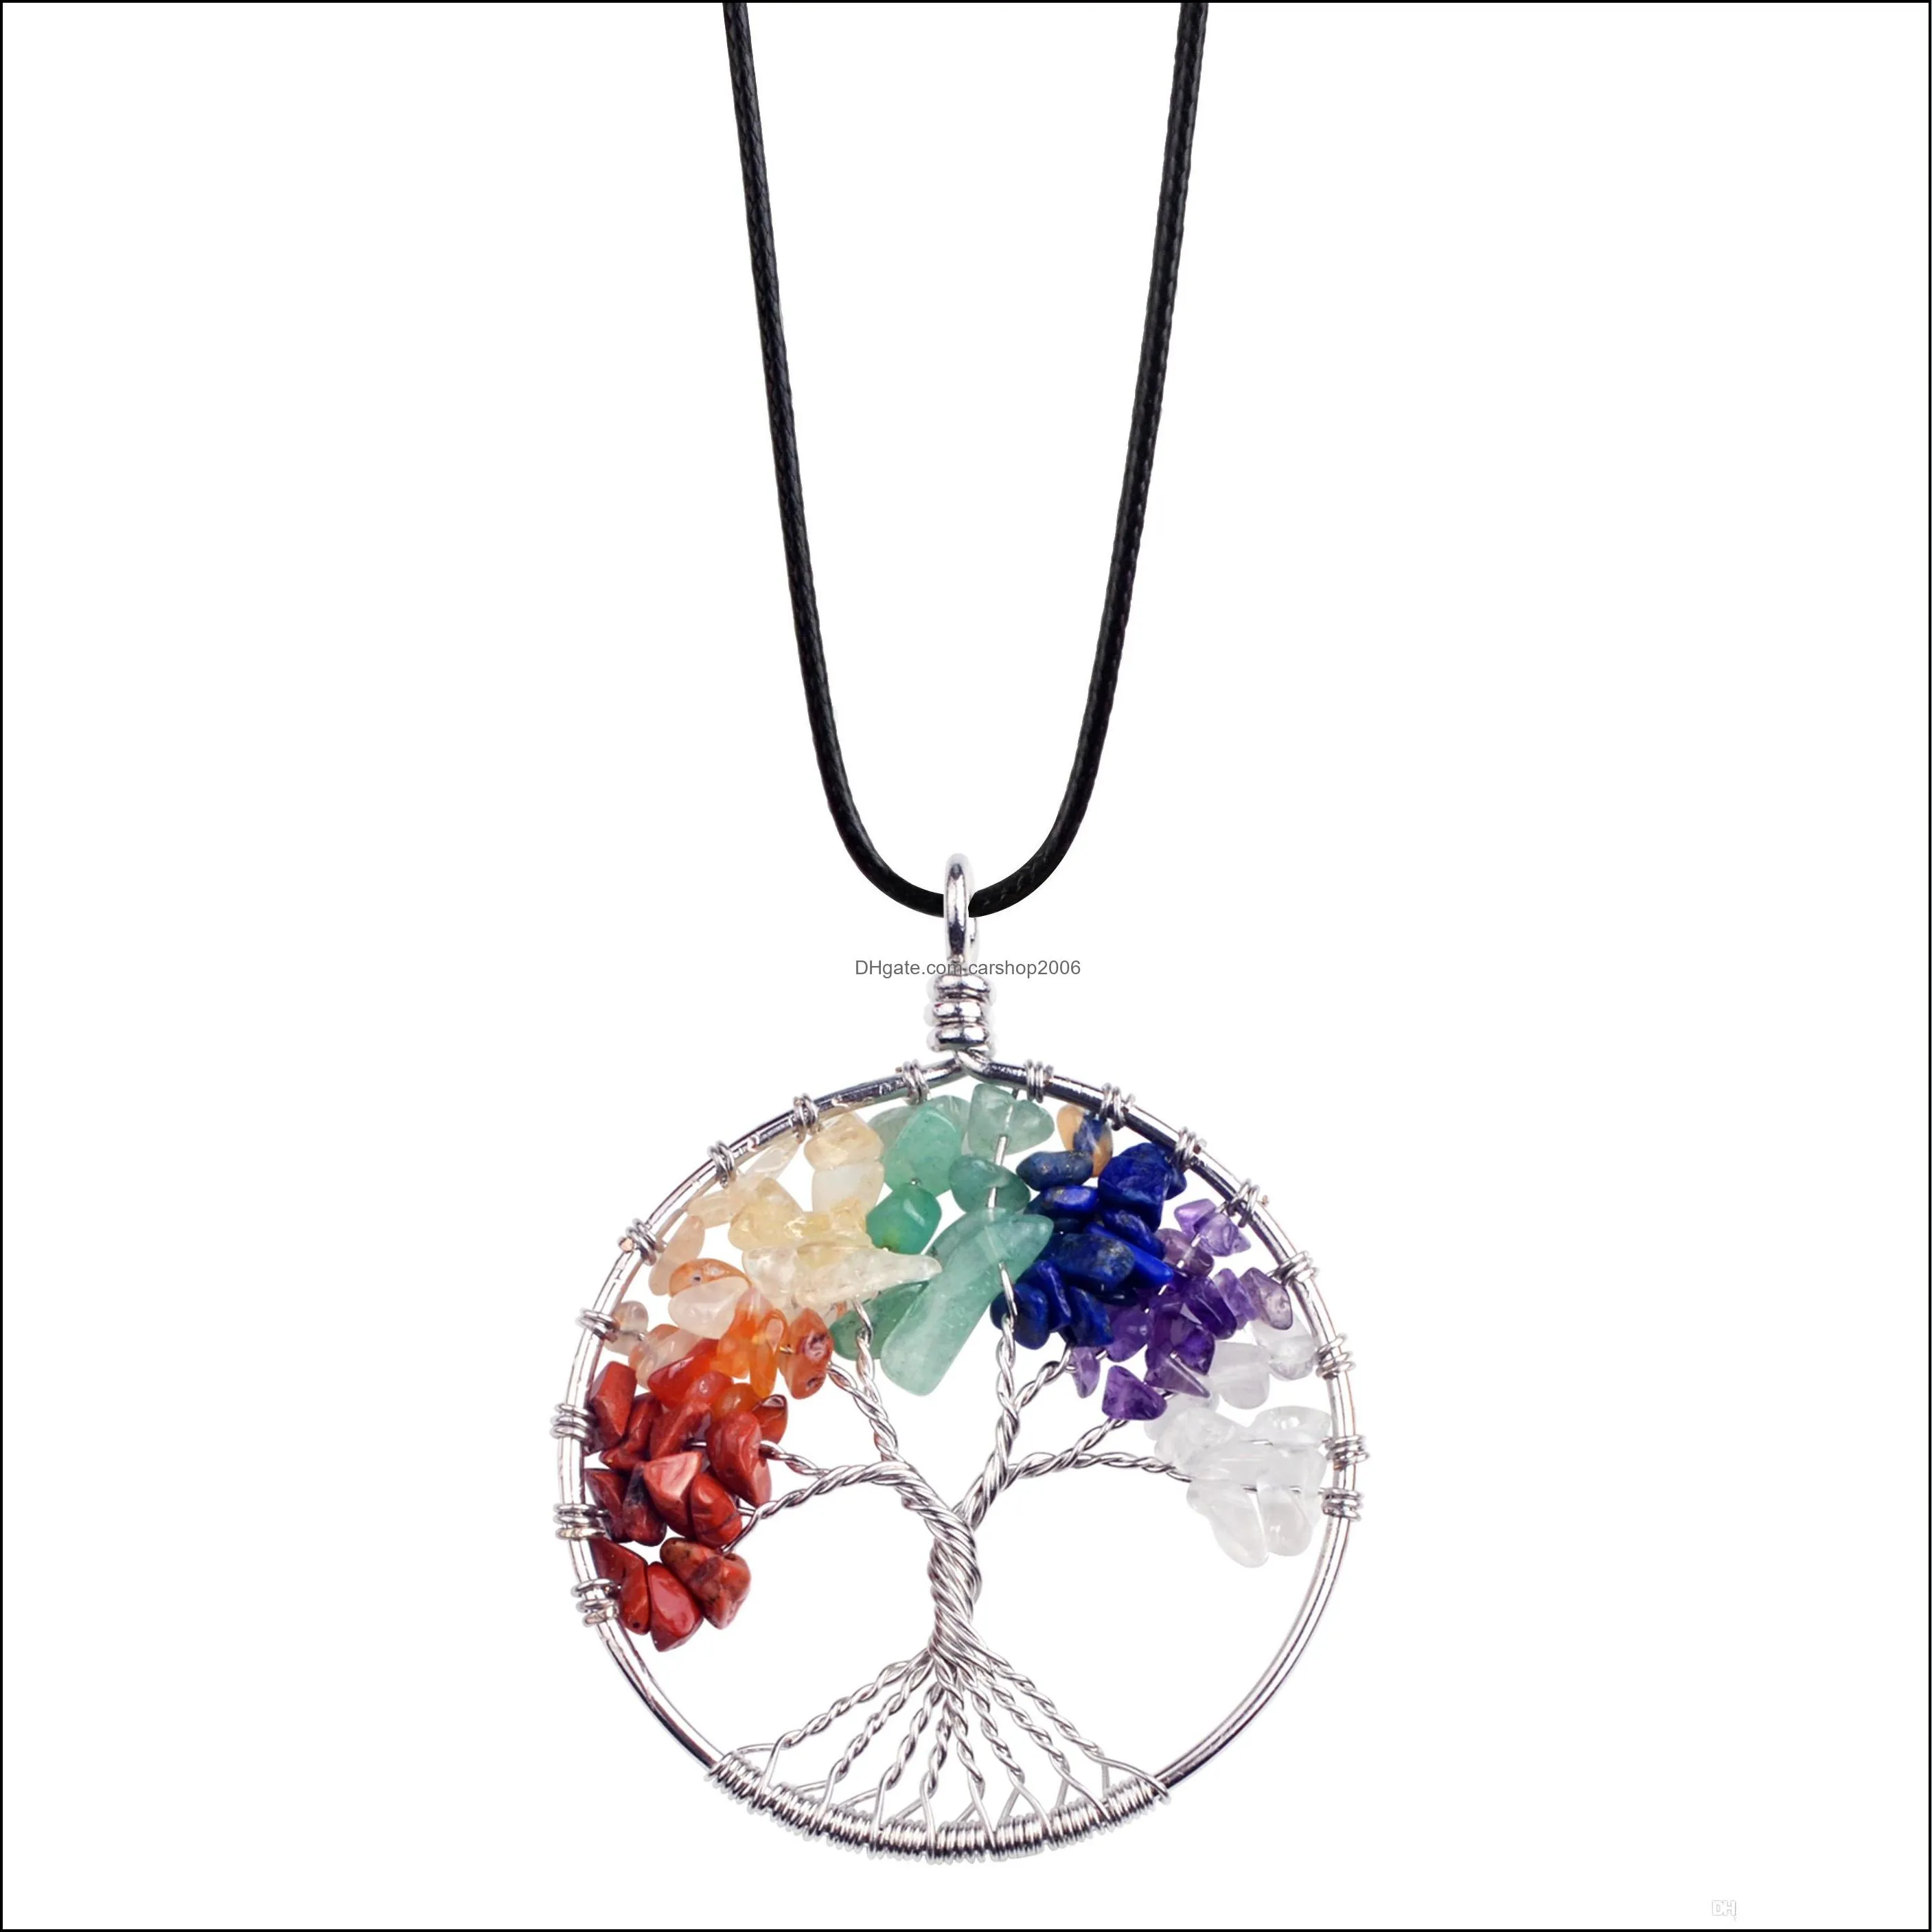 Tree of Life Necklace 7 Chakra Stone Beads Natural Amethyst Sterling-silver-jewelry Chain Choker Pendant Necklaces for Women Gift